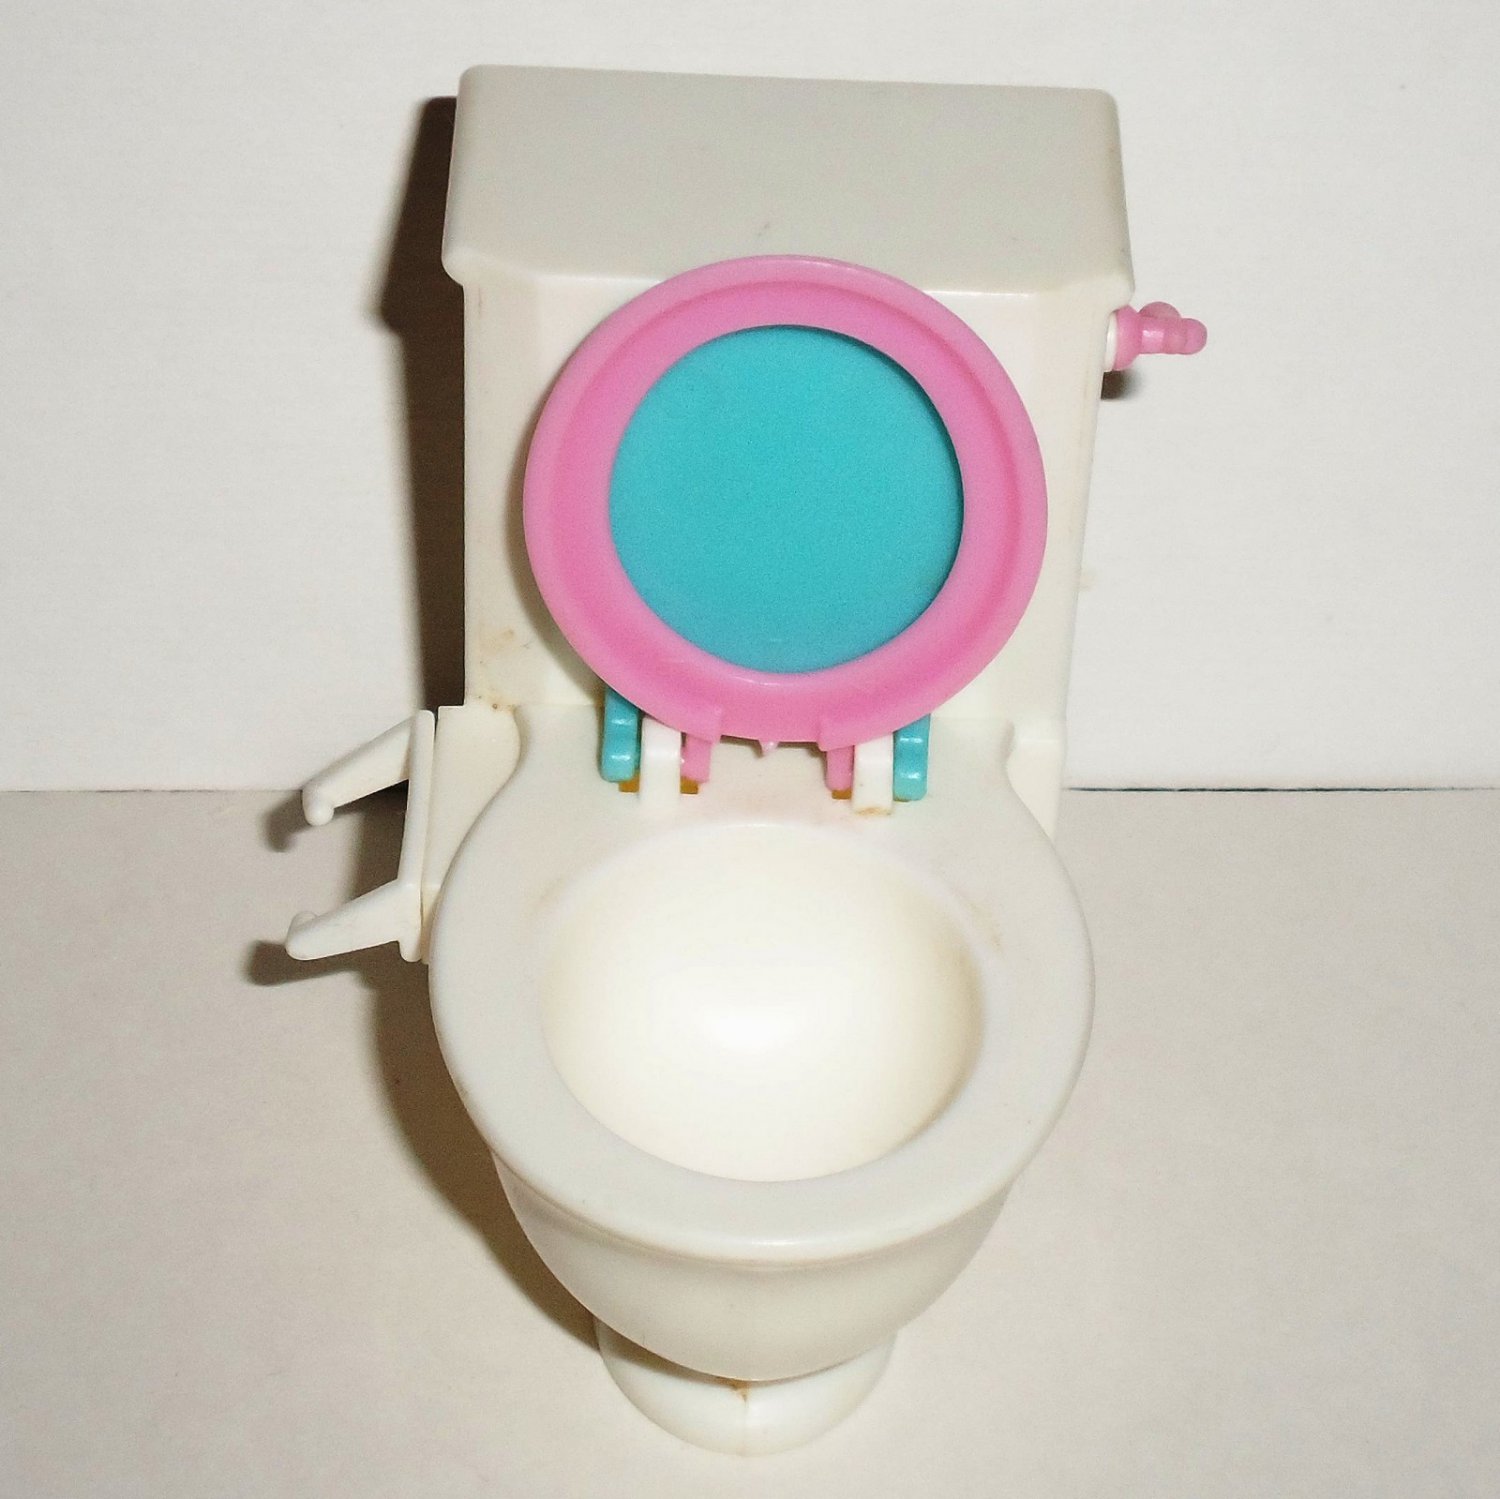 Barbie Toilet from Potty Training Kelly Set Mattel 1996 Loose Used